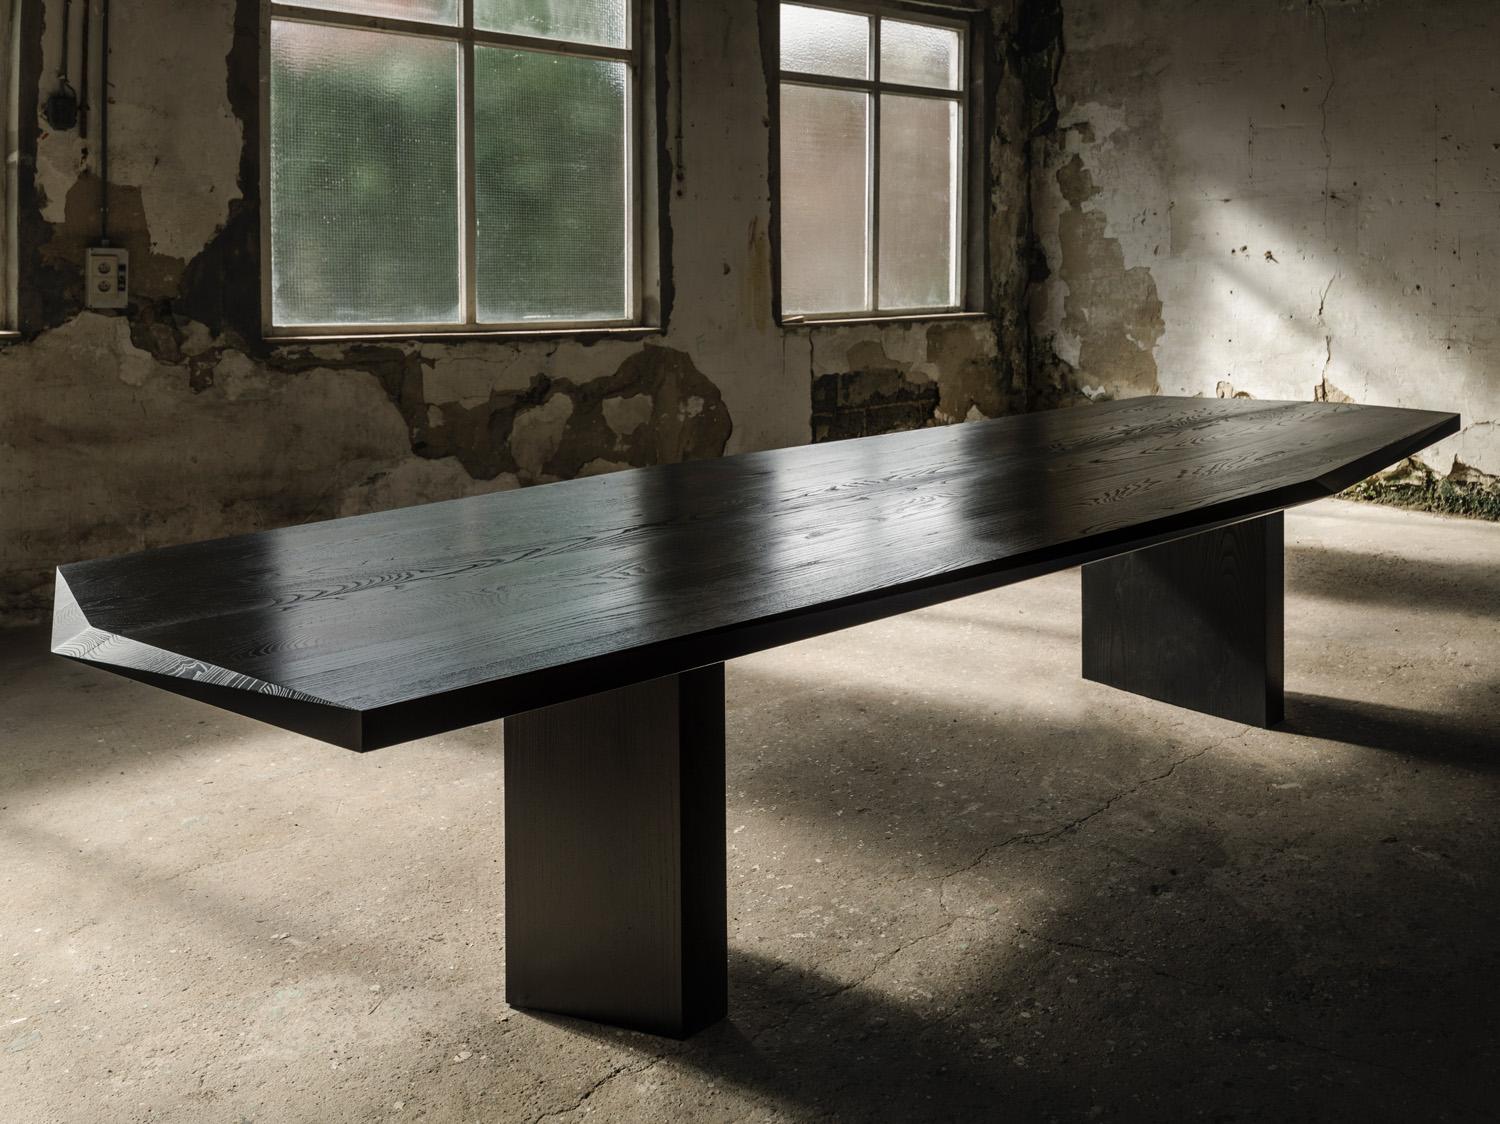 Hera 360 table by Tim Vranken
Materials: Black American Ash
Dimensions: L 360 x W 129 x H 75 cm

Also available in American Ash and American Walnut. 

Hera, an interplay of lines and shapes, without the slightest frills. 

Tim Vranken is a